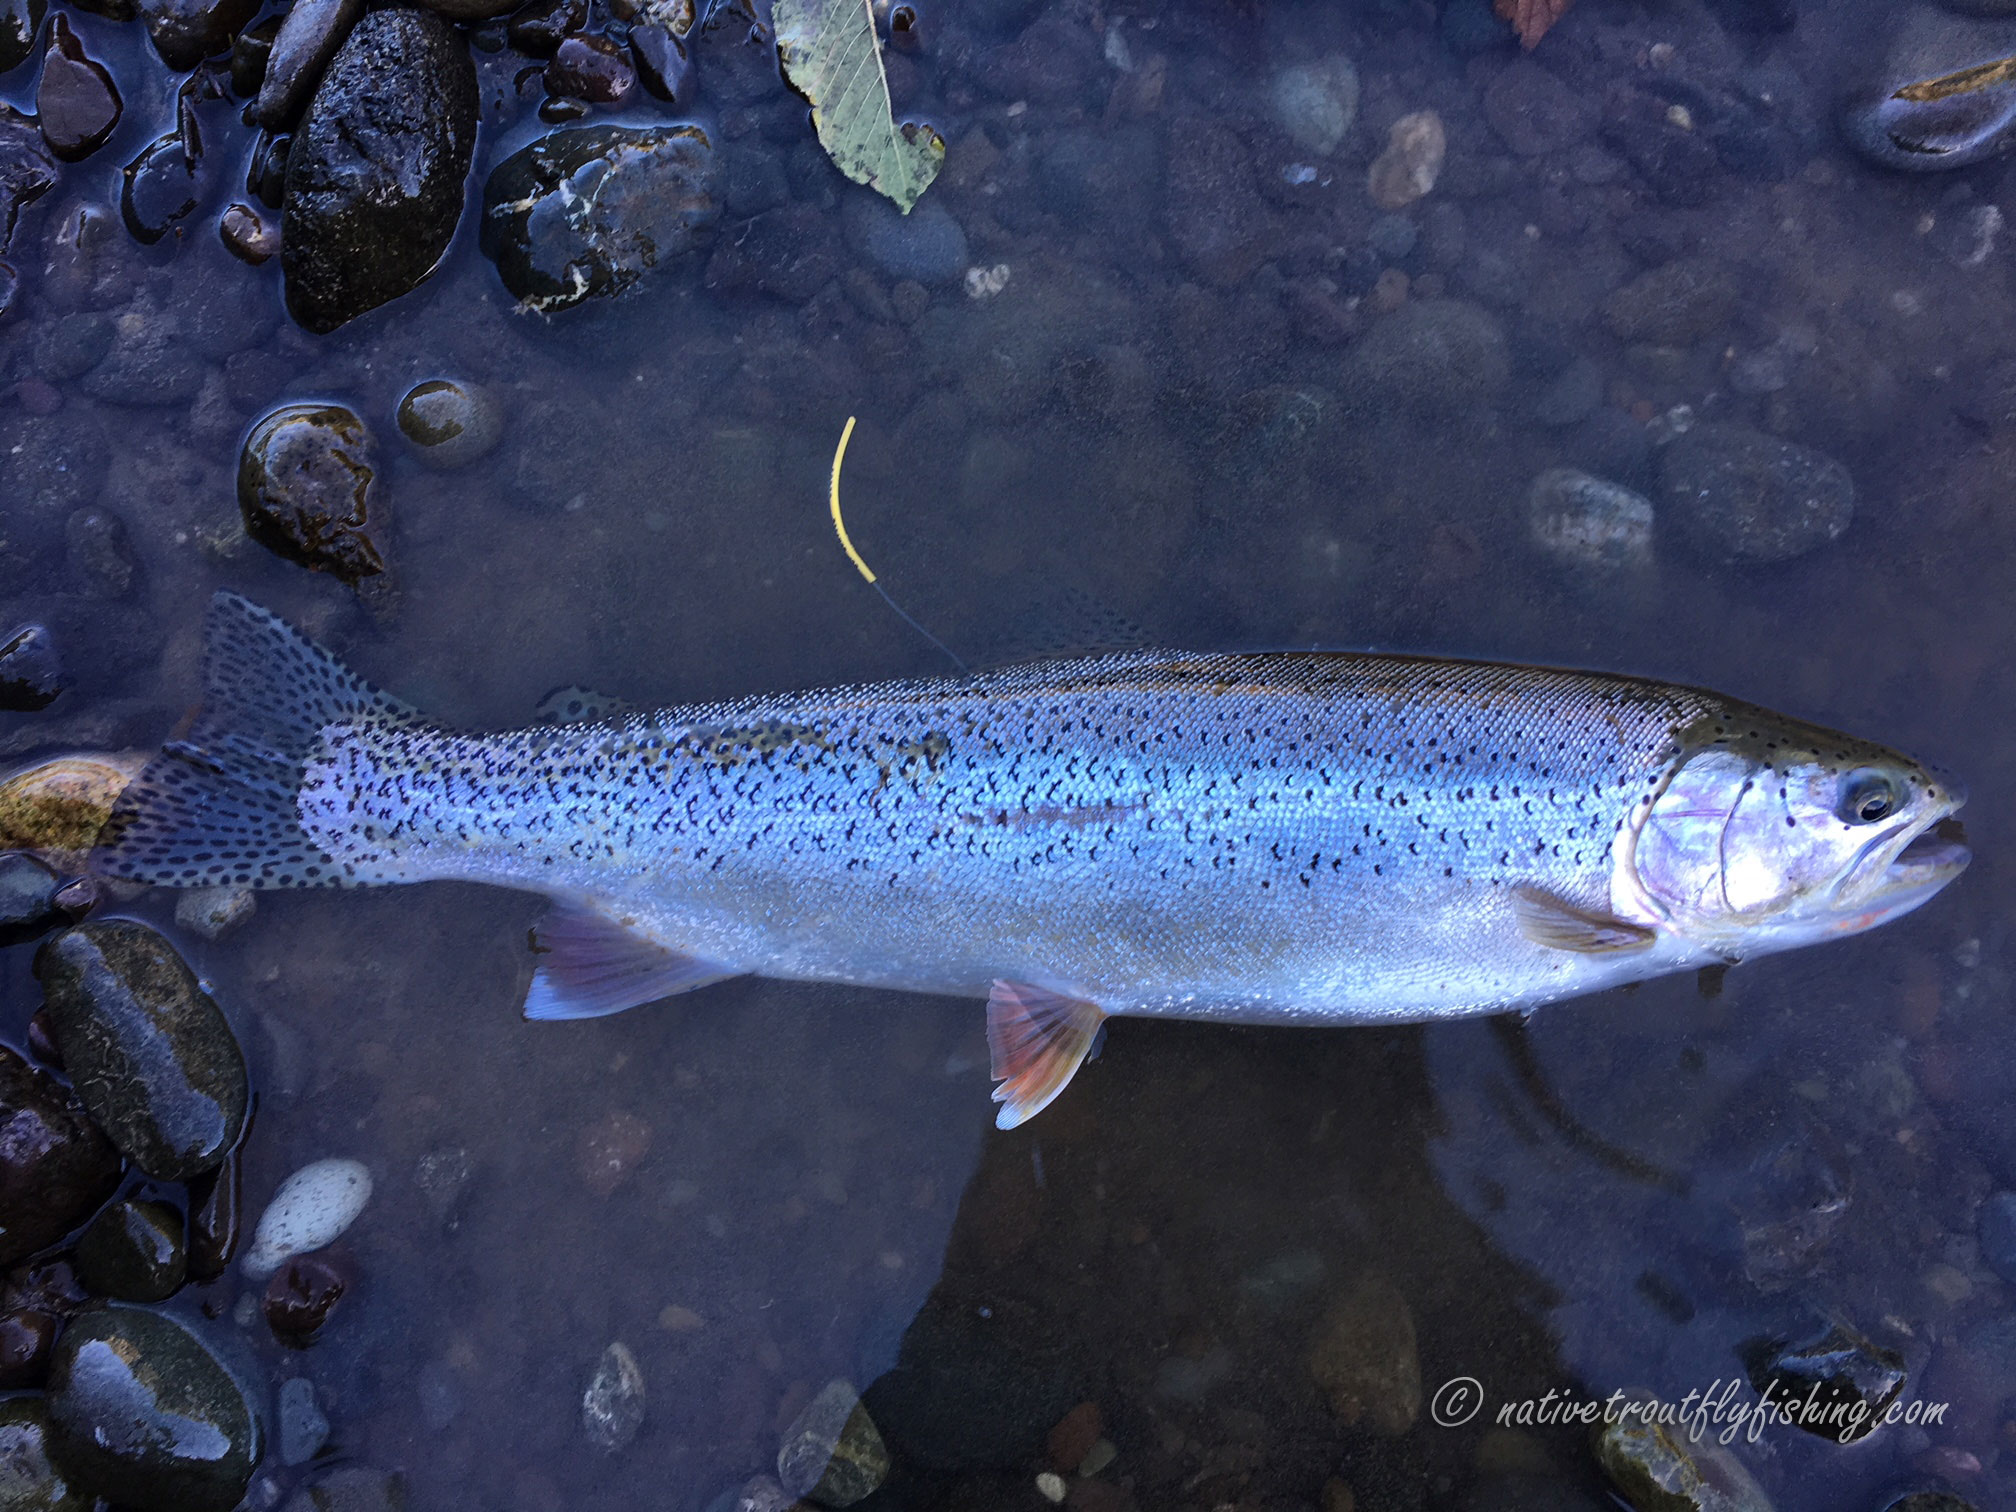 Native Trout Fly Fishing: Coastal Cutthroat Trout